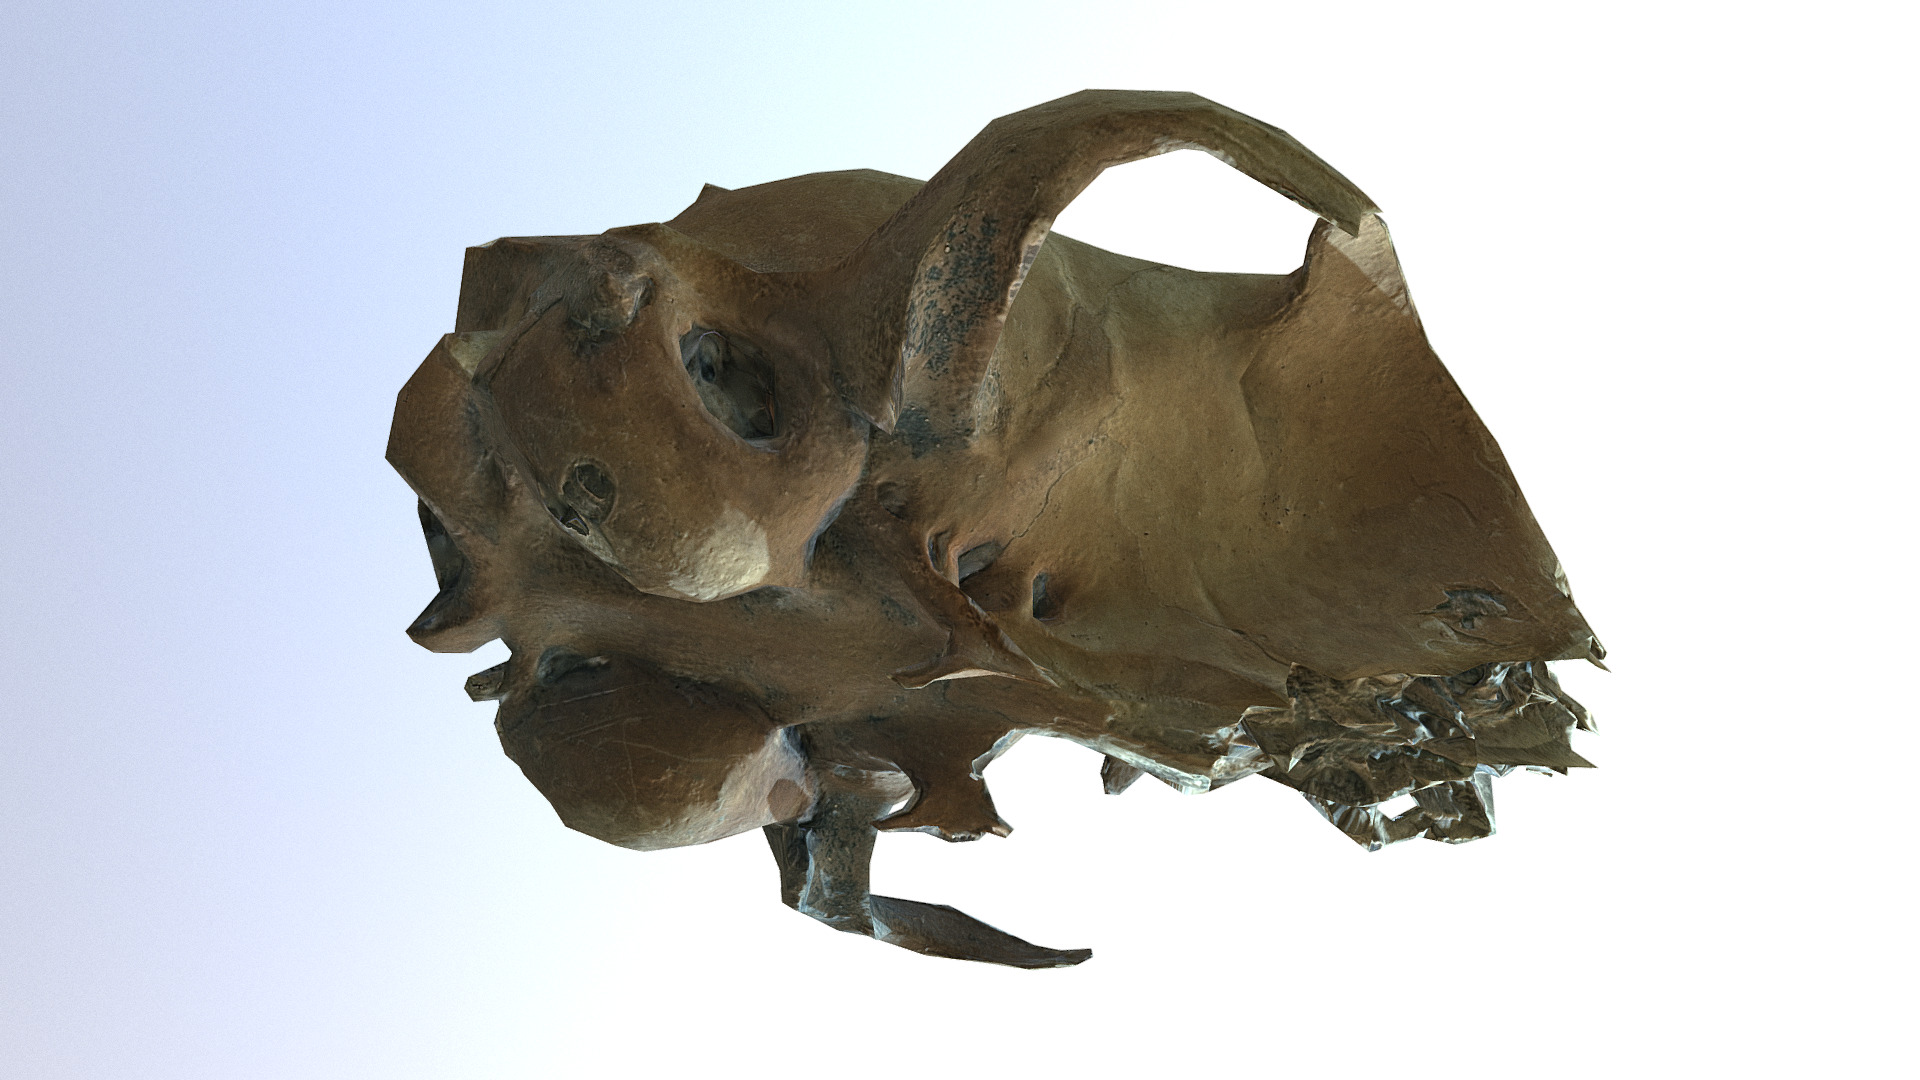 3D model Skull nr 2 - This is a 3D model of the Skull nr 2. The 3D model is about a close-up of a frog.